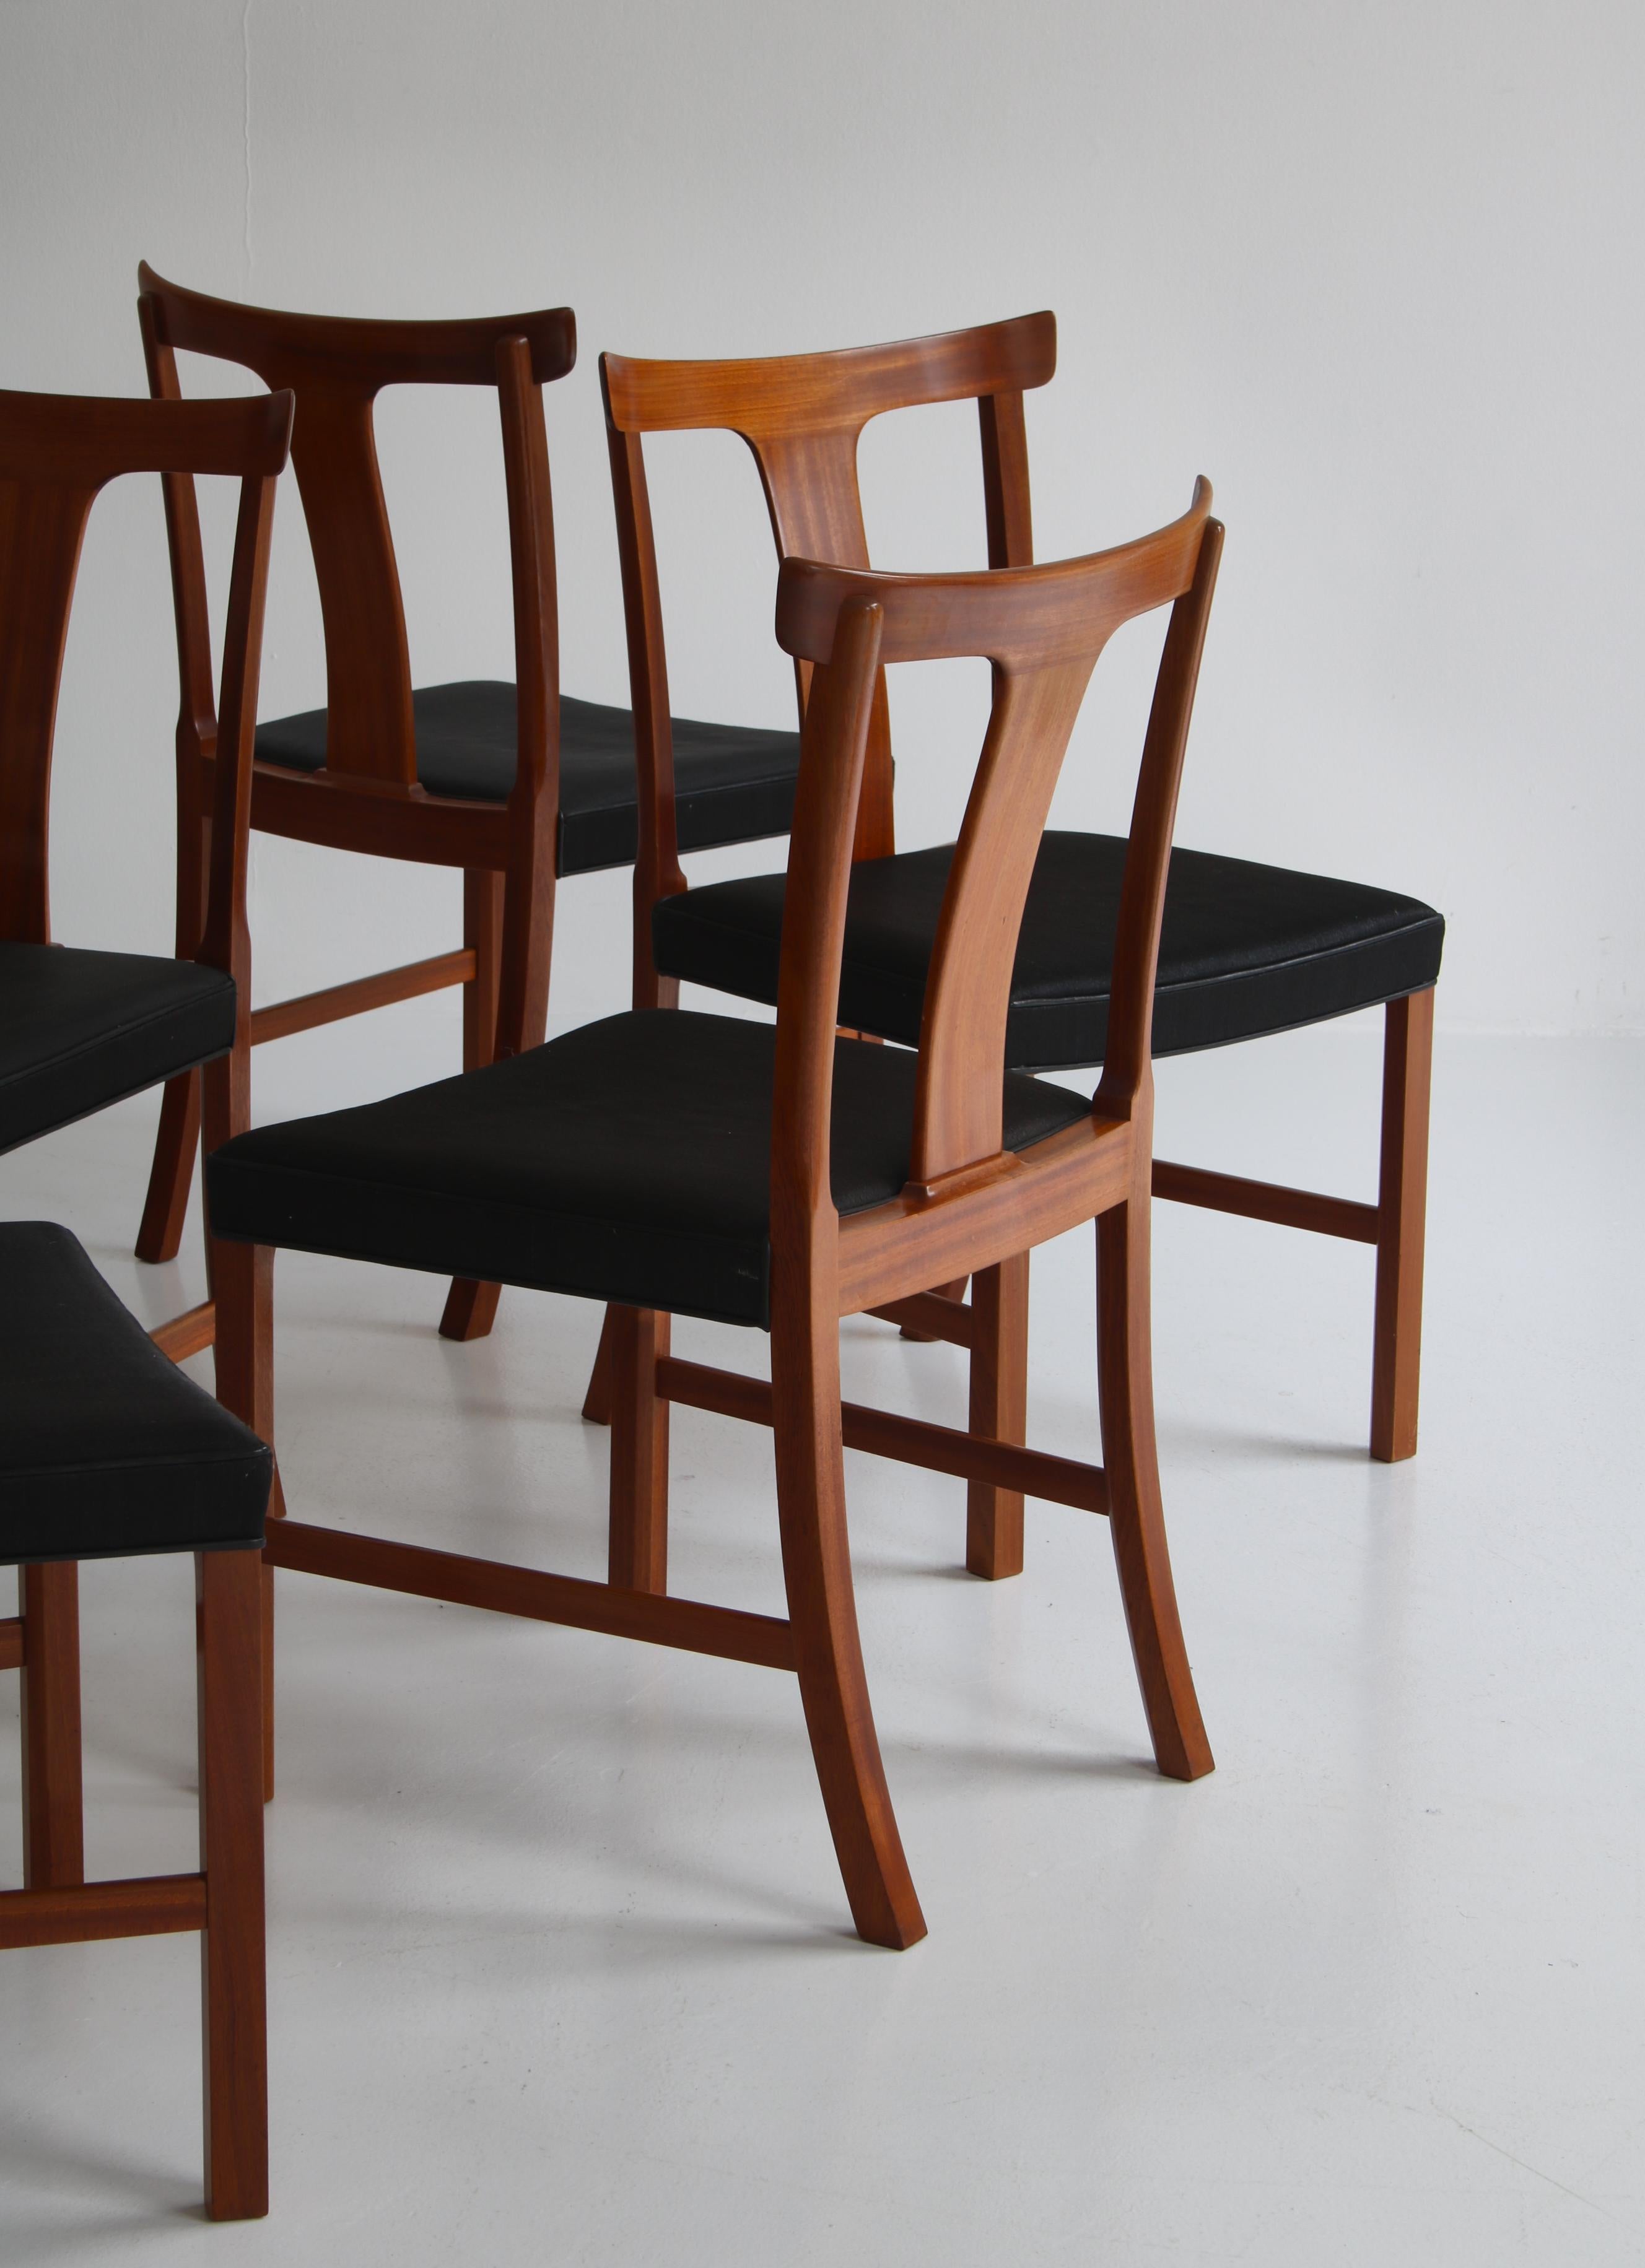 Danish Ole Wanscher Dining Chairs in Mahogany and Horsehair Made by A.J. Iversen, 1960s For Sale